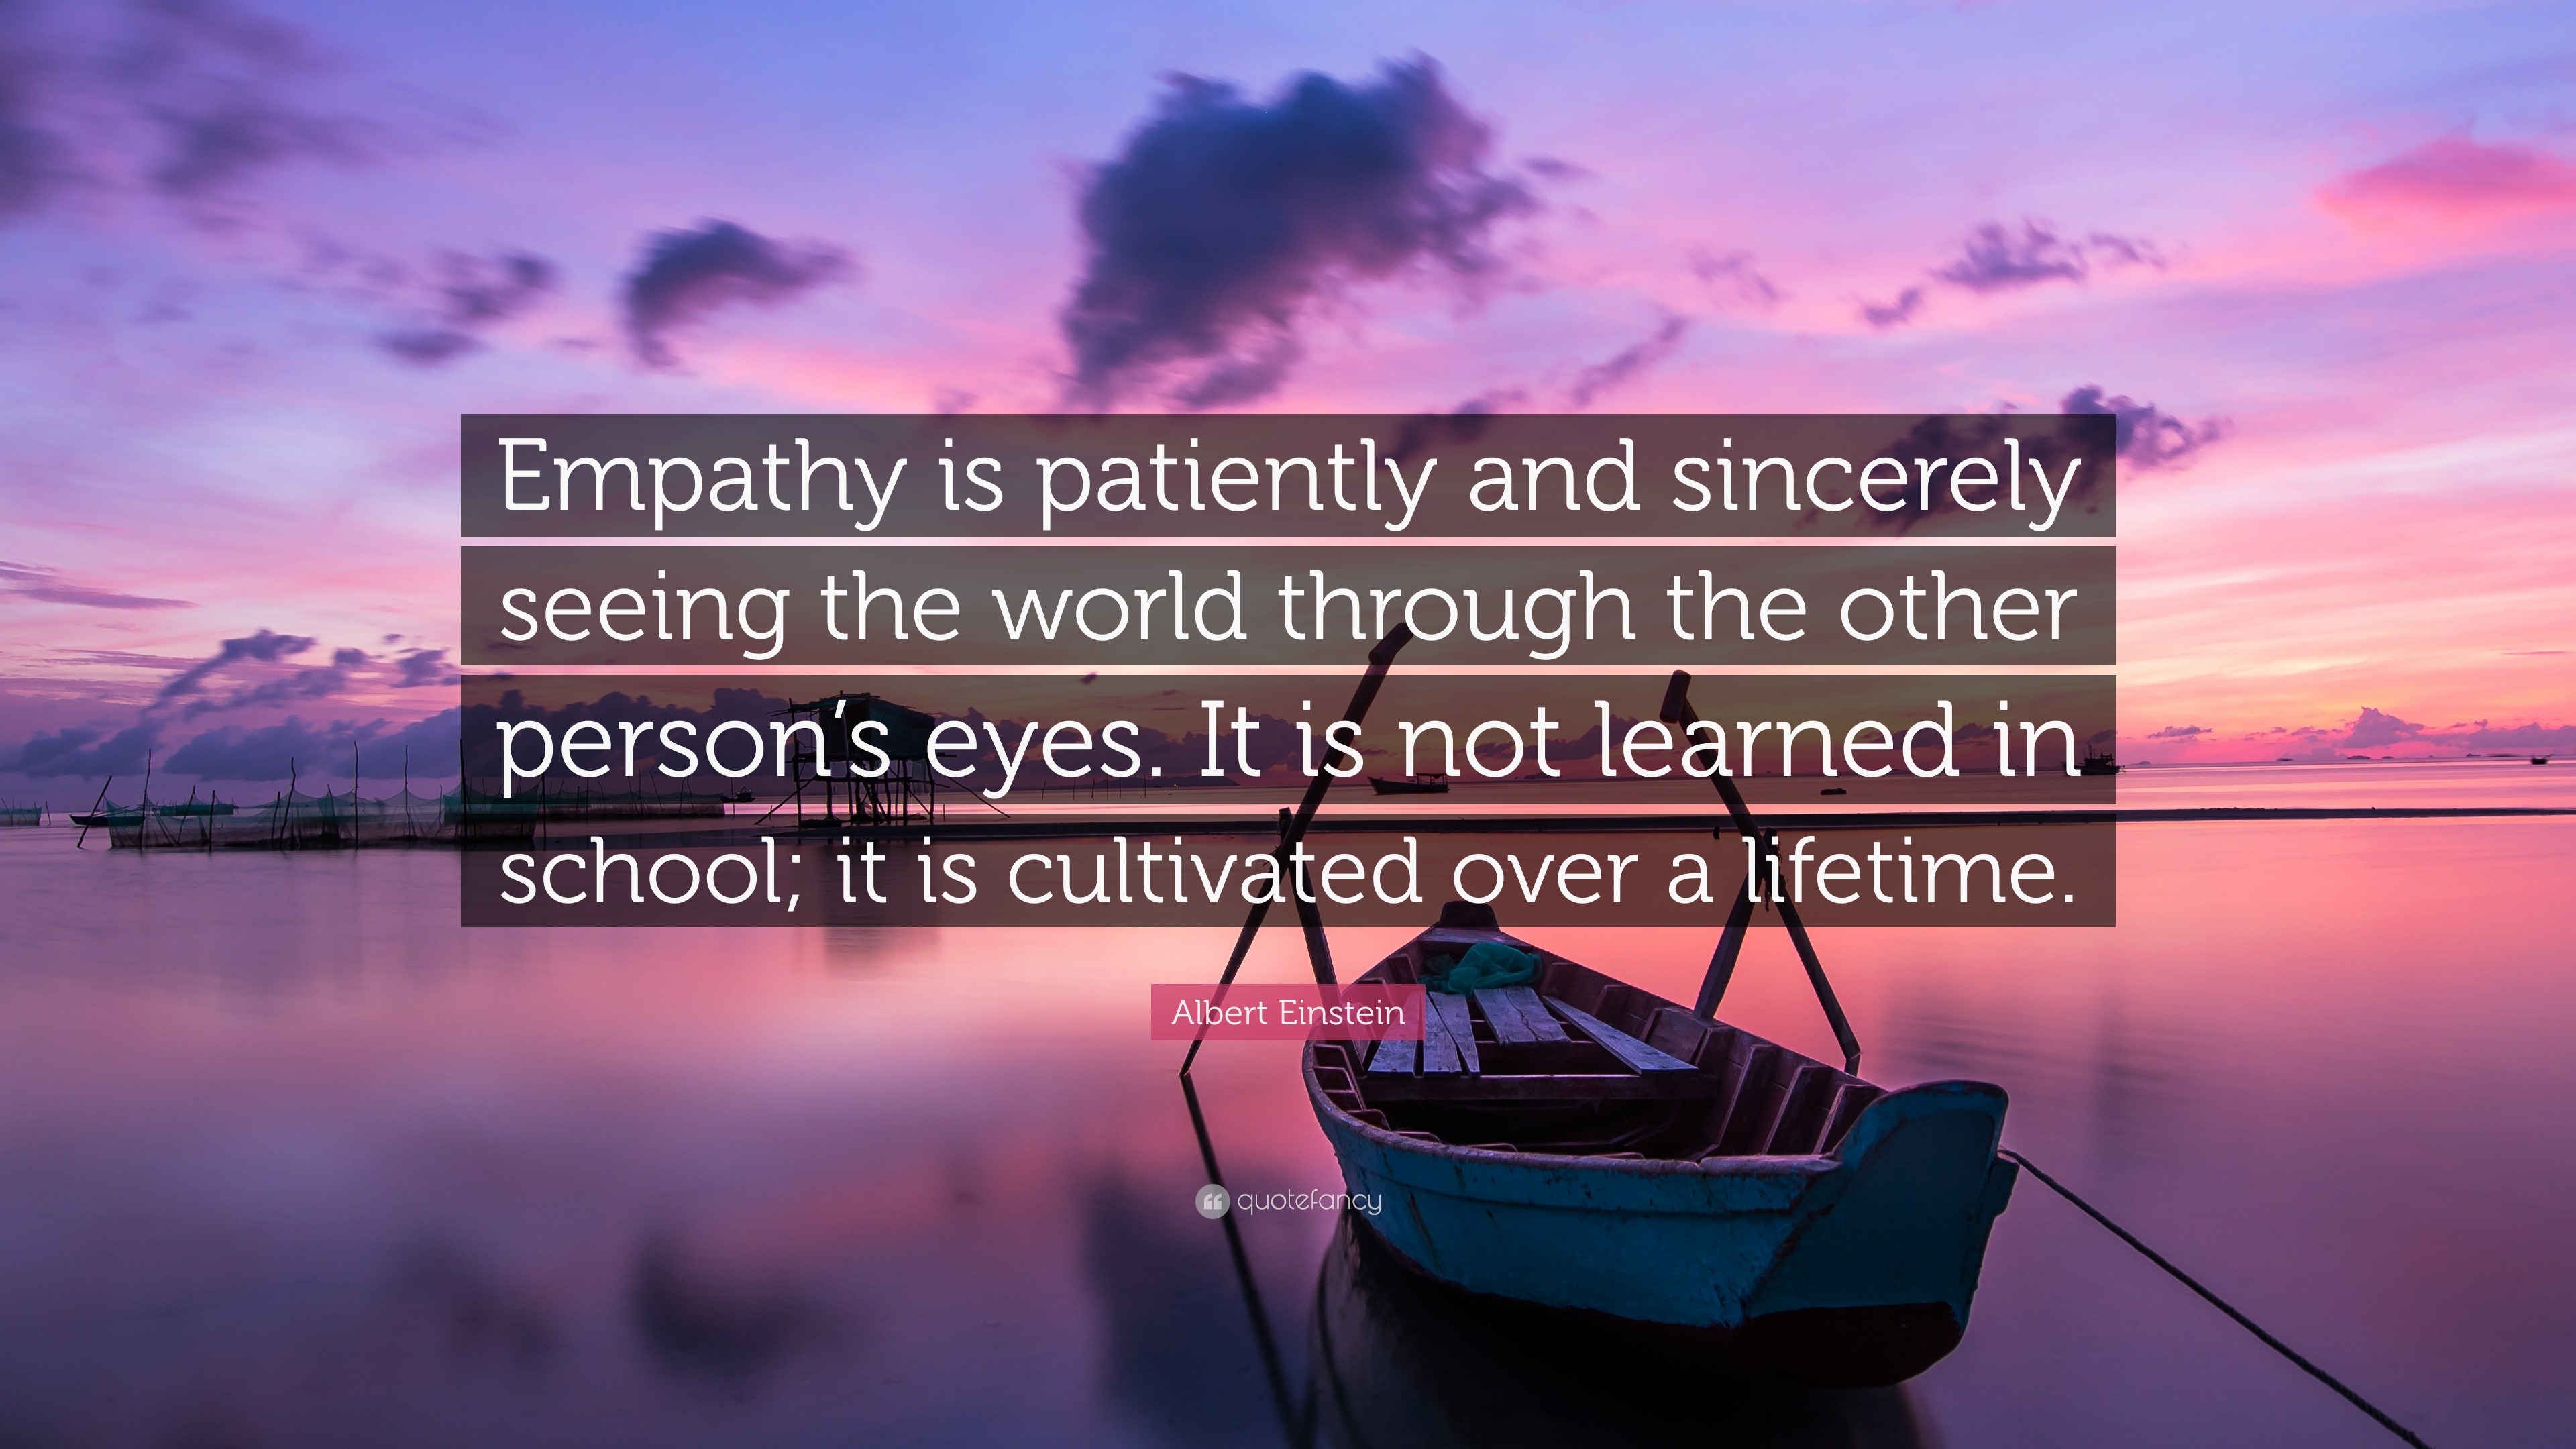 Albert Einstein Quote: “Empathy is patiently and sincerely seeing the